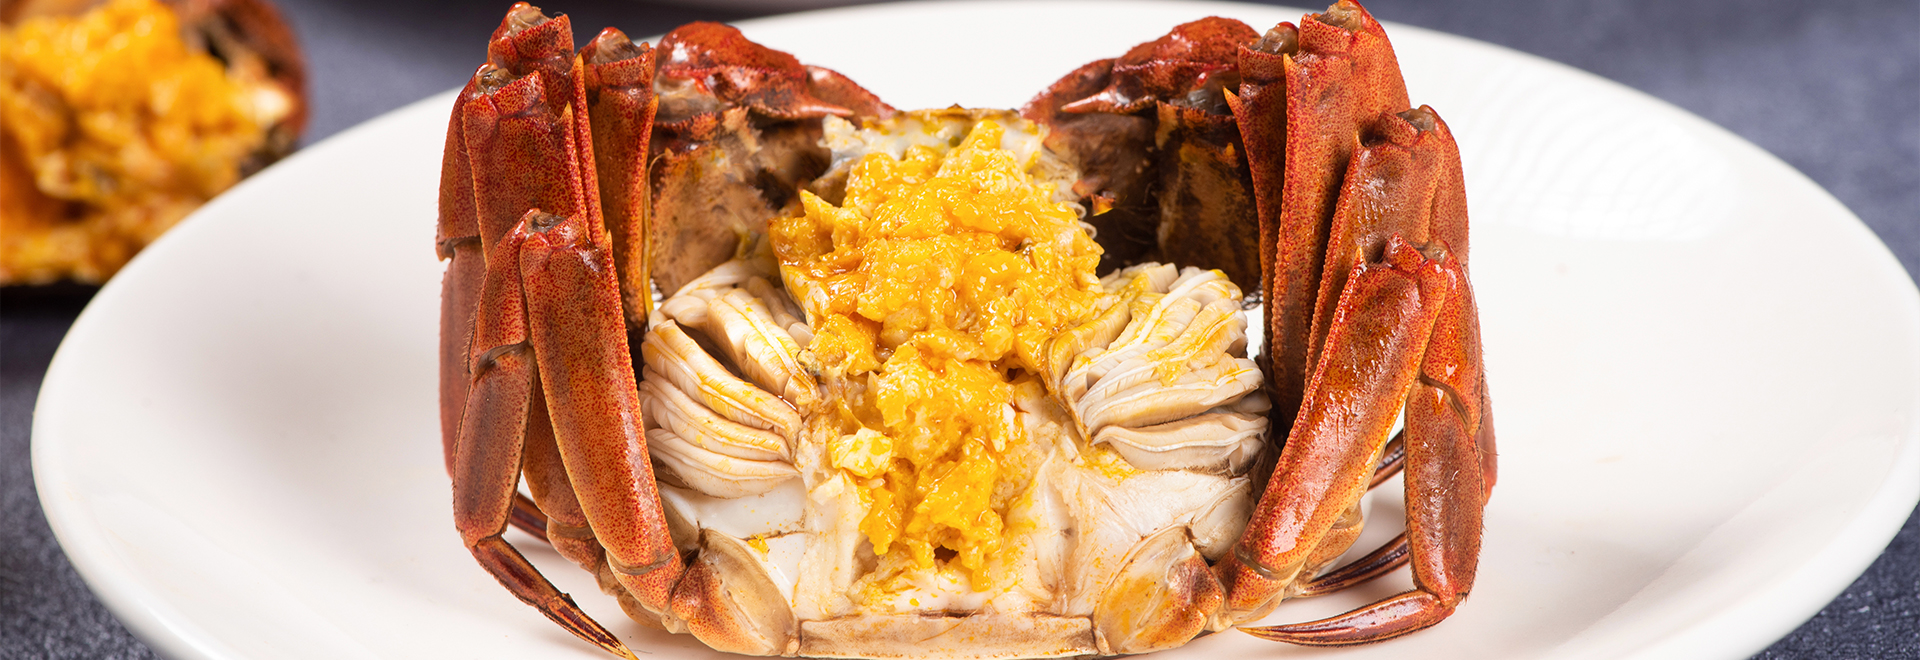 is-it-safe-to-eat-hairy-crabs